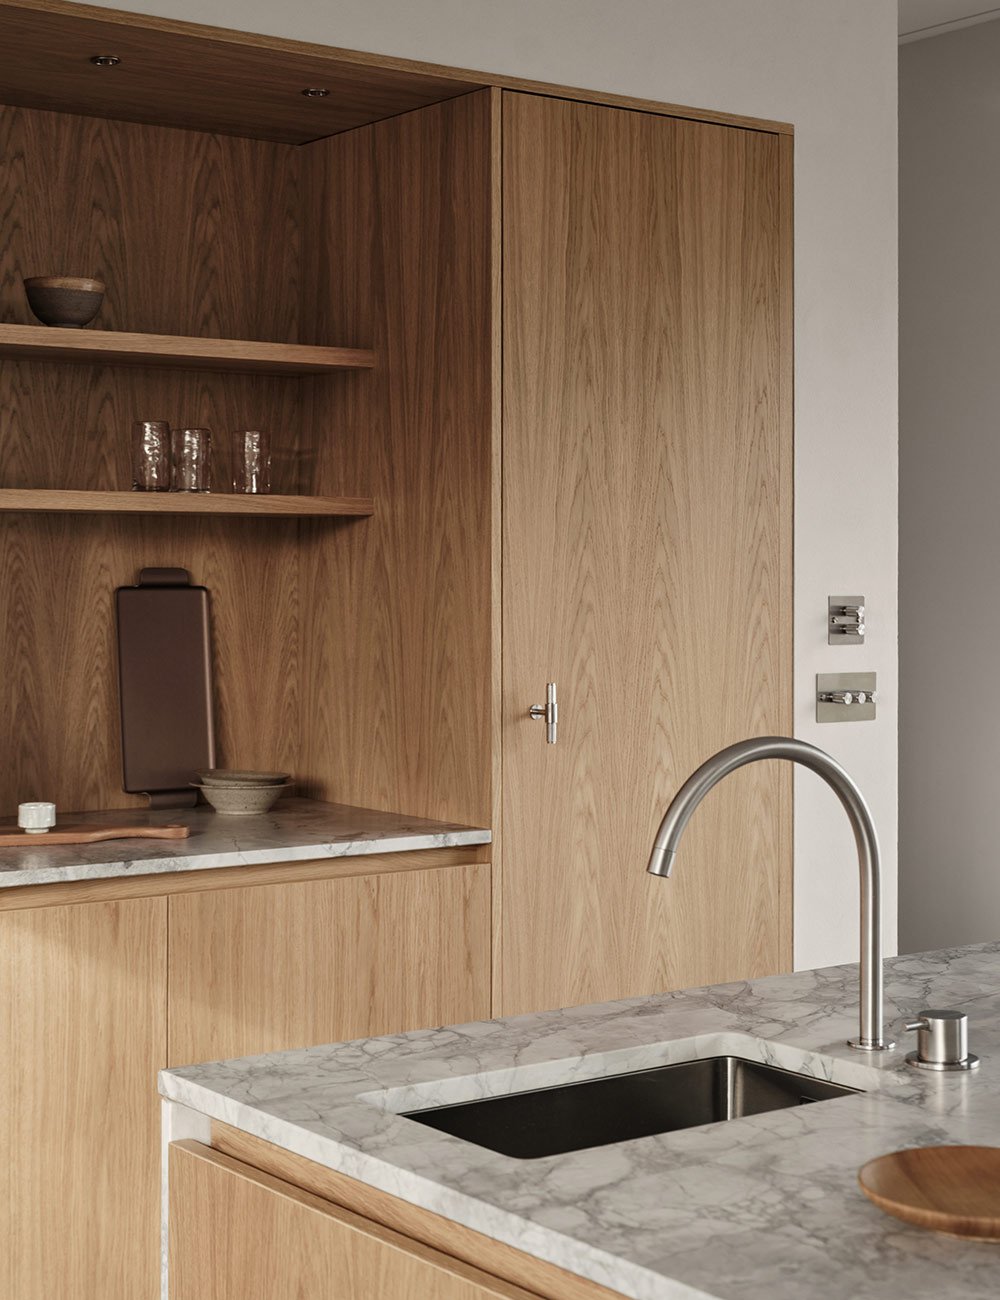 Sink from Decosteel, and tap from Vola